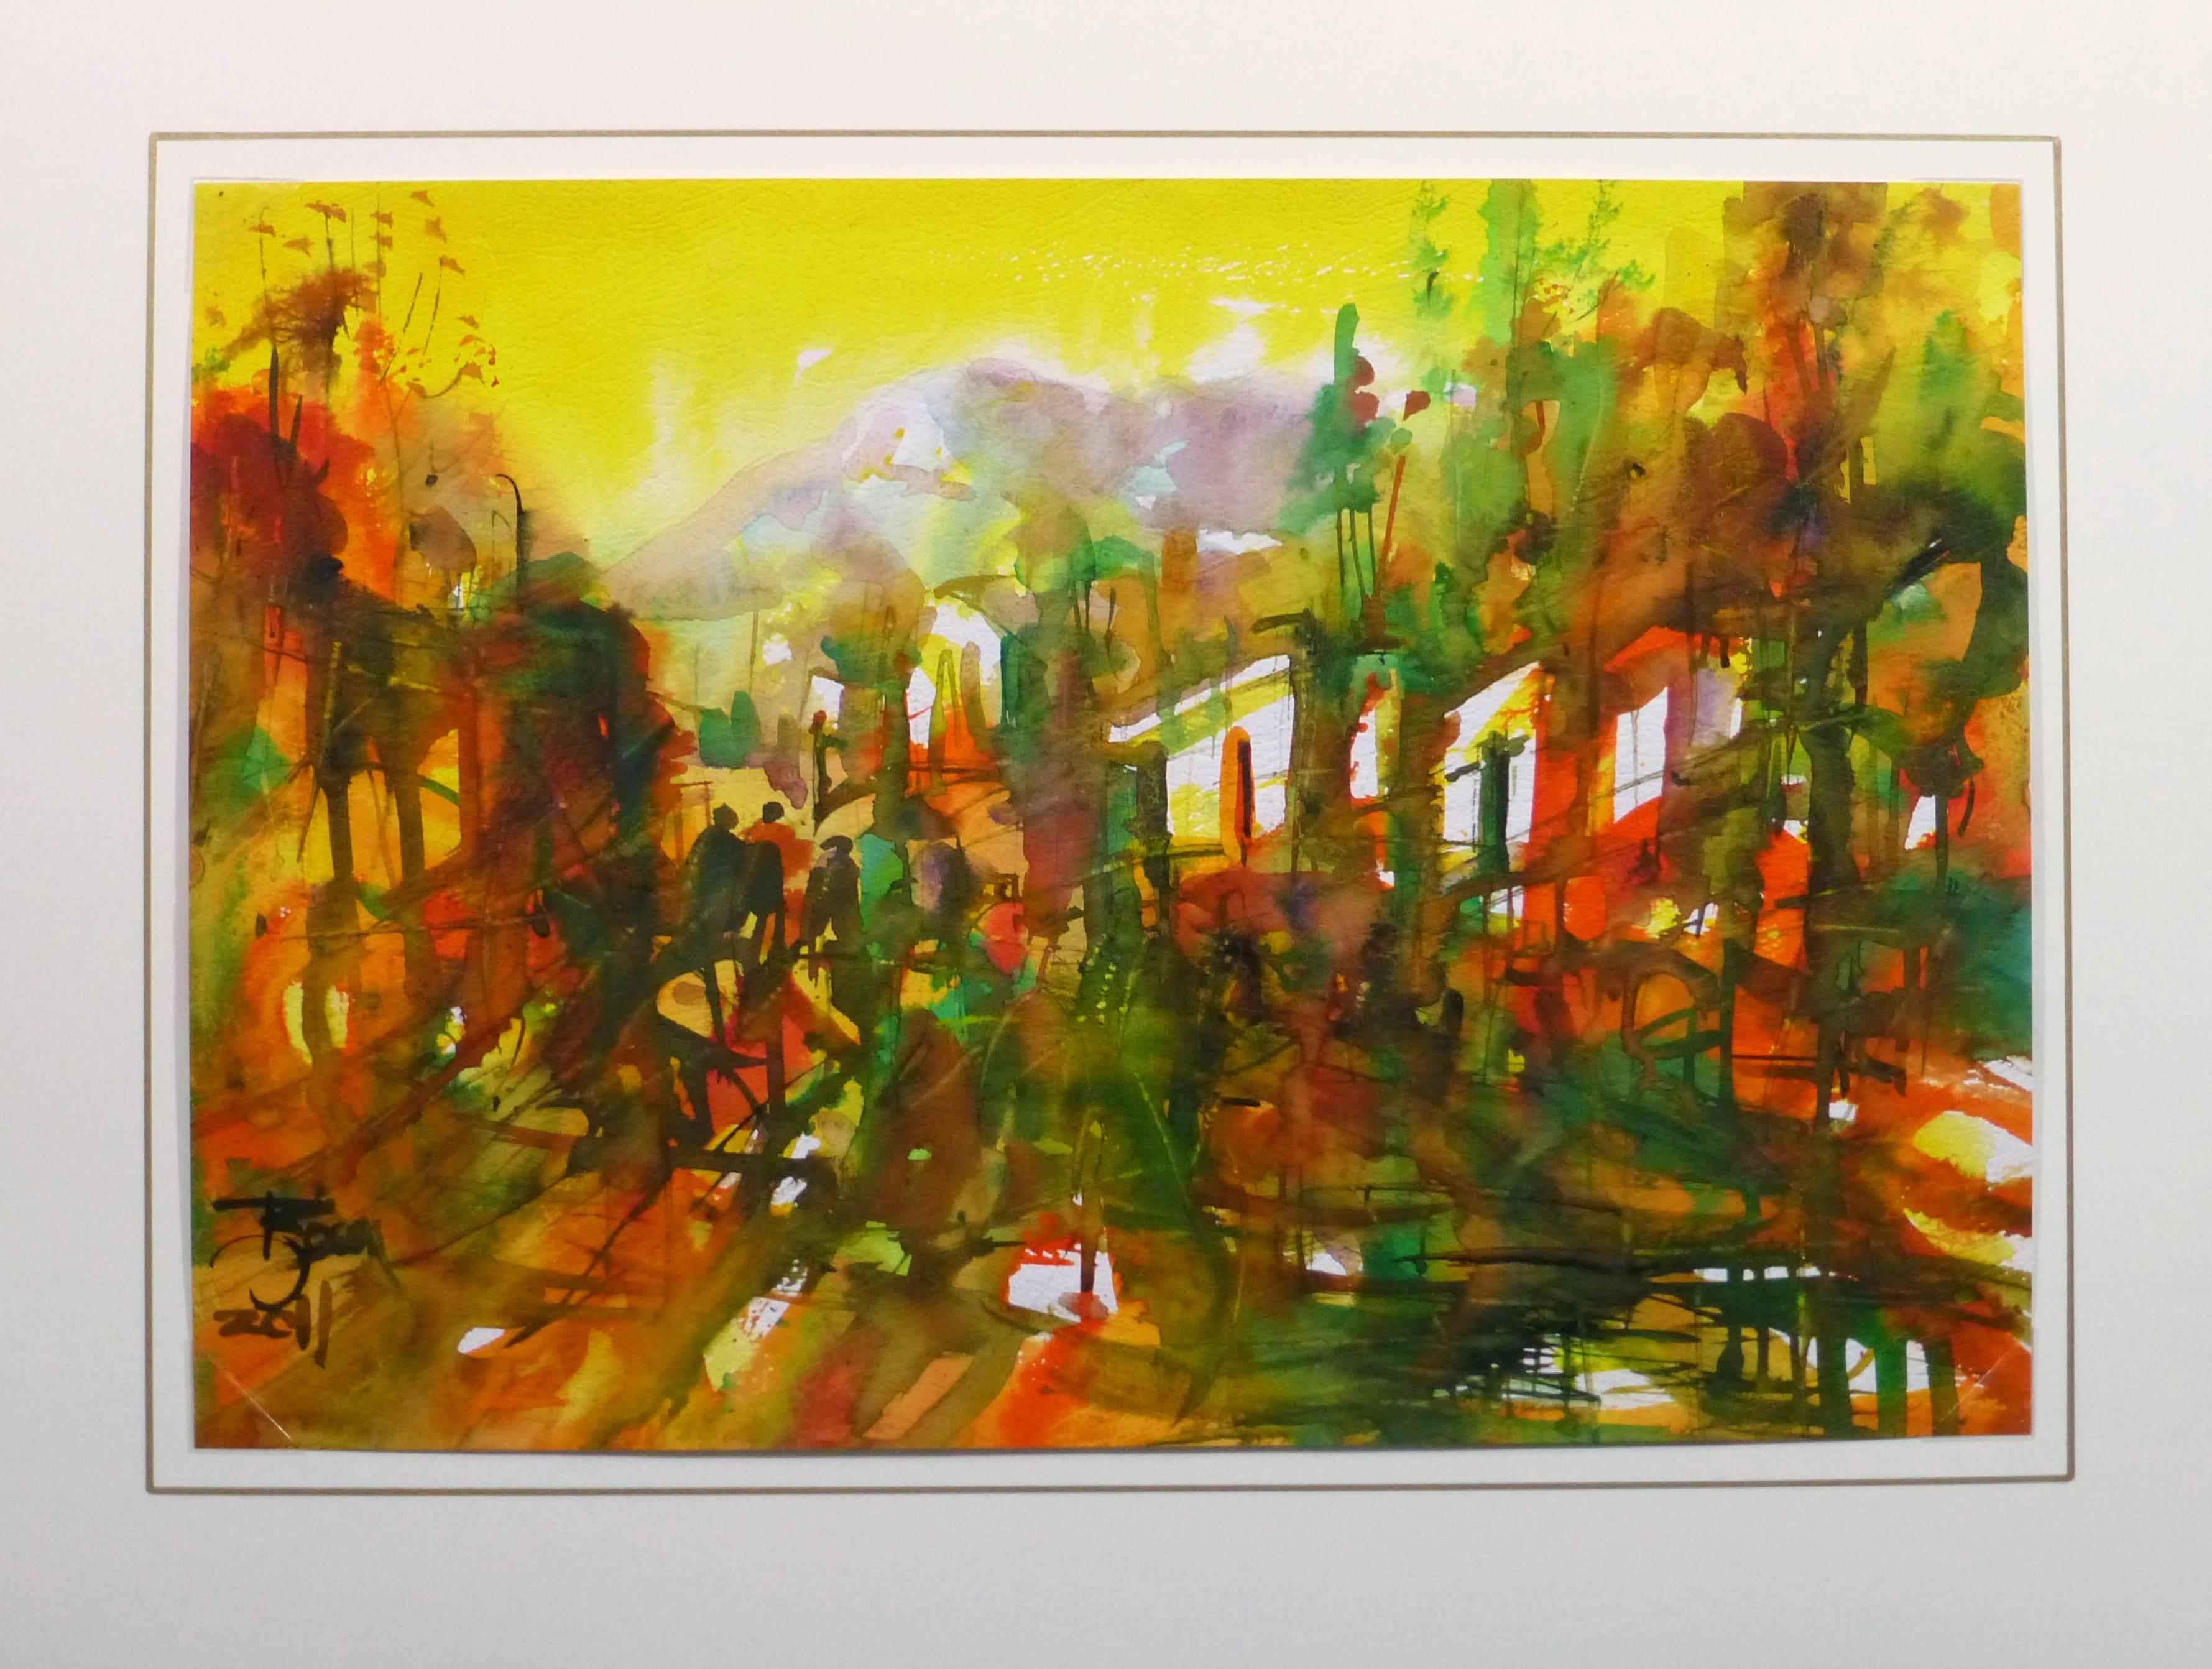 Splendid Peruvian watercolor of a forest surrounding a mountain peaks in warm hues of orange, yellow and green, 2011. Signed and dated lower left.

Original artwork on paper displayed on a white mat with a gold border. Archival plastic sleeve and